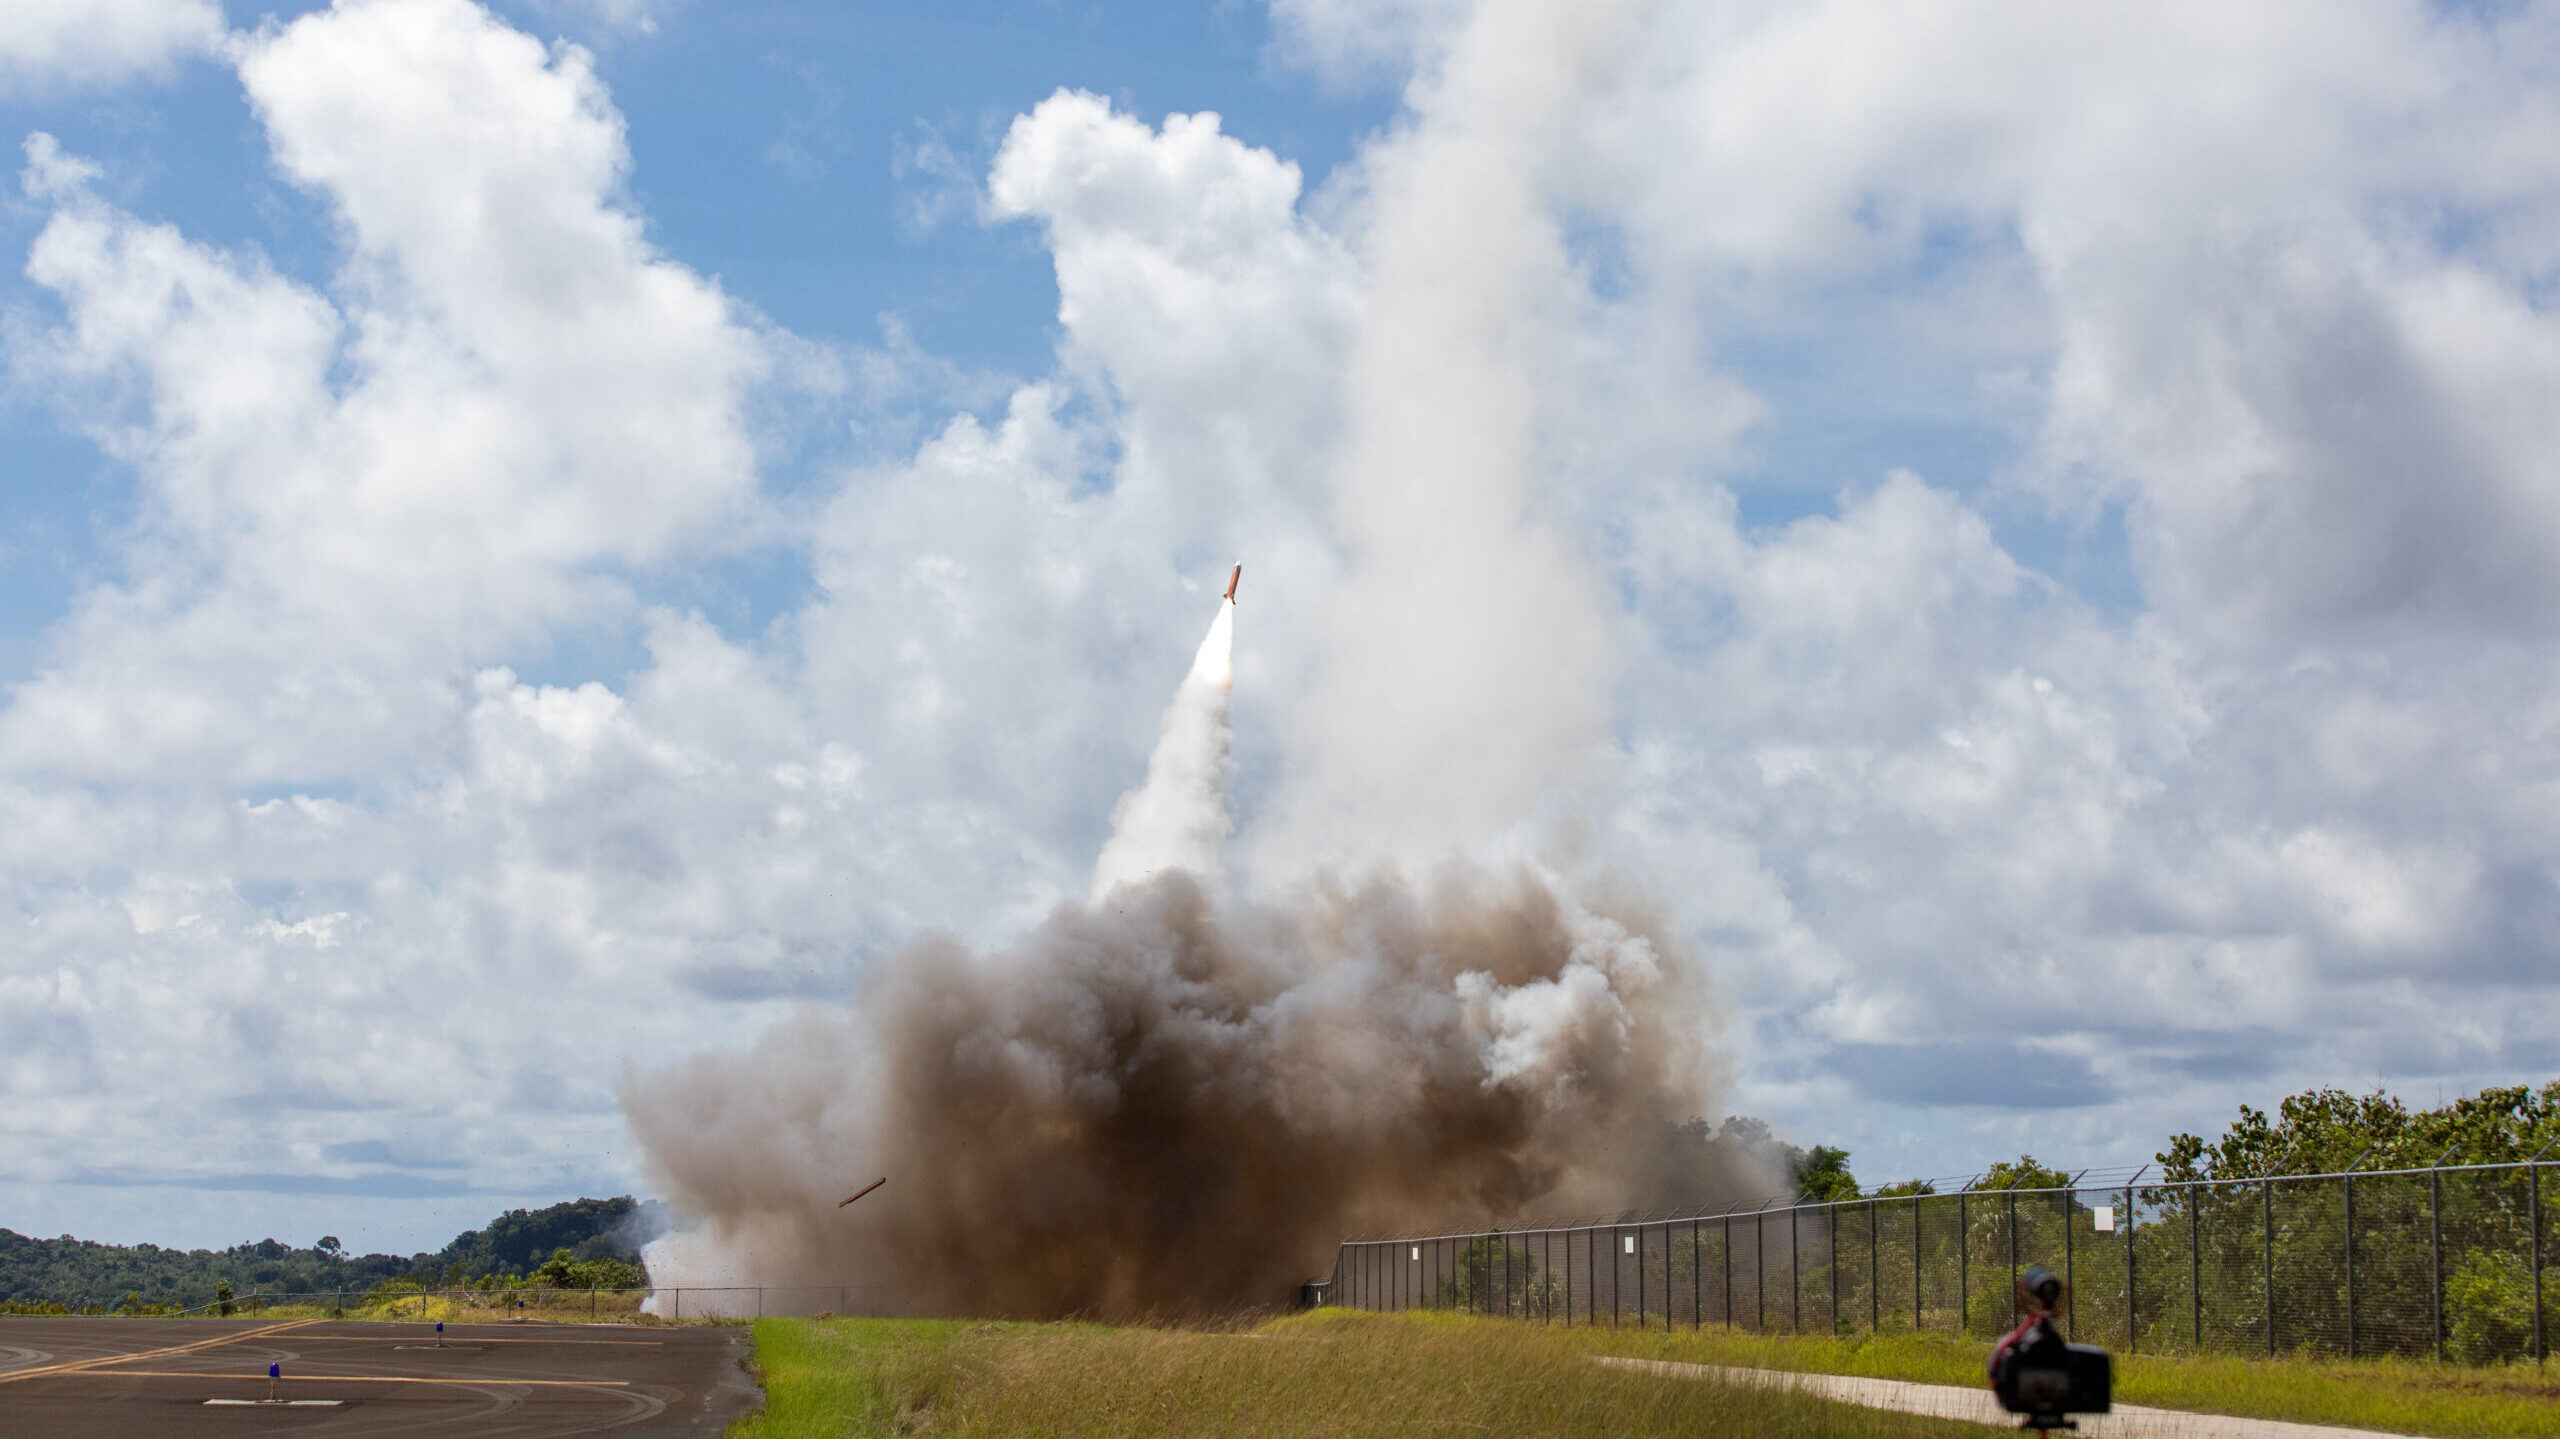 Patriot Missile Launches during Palau Live-Fire Exercise